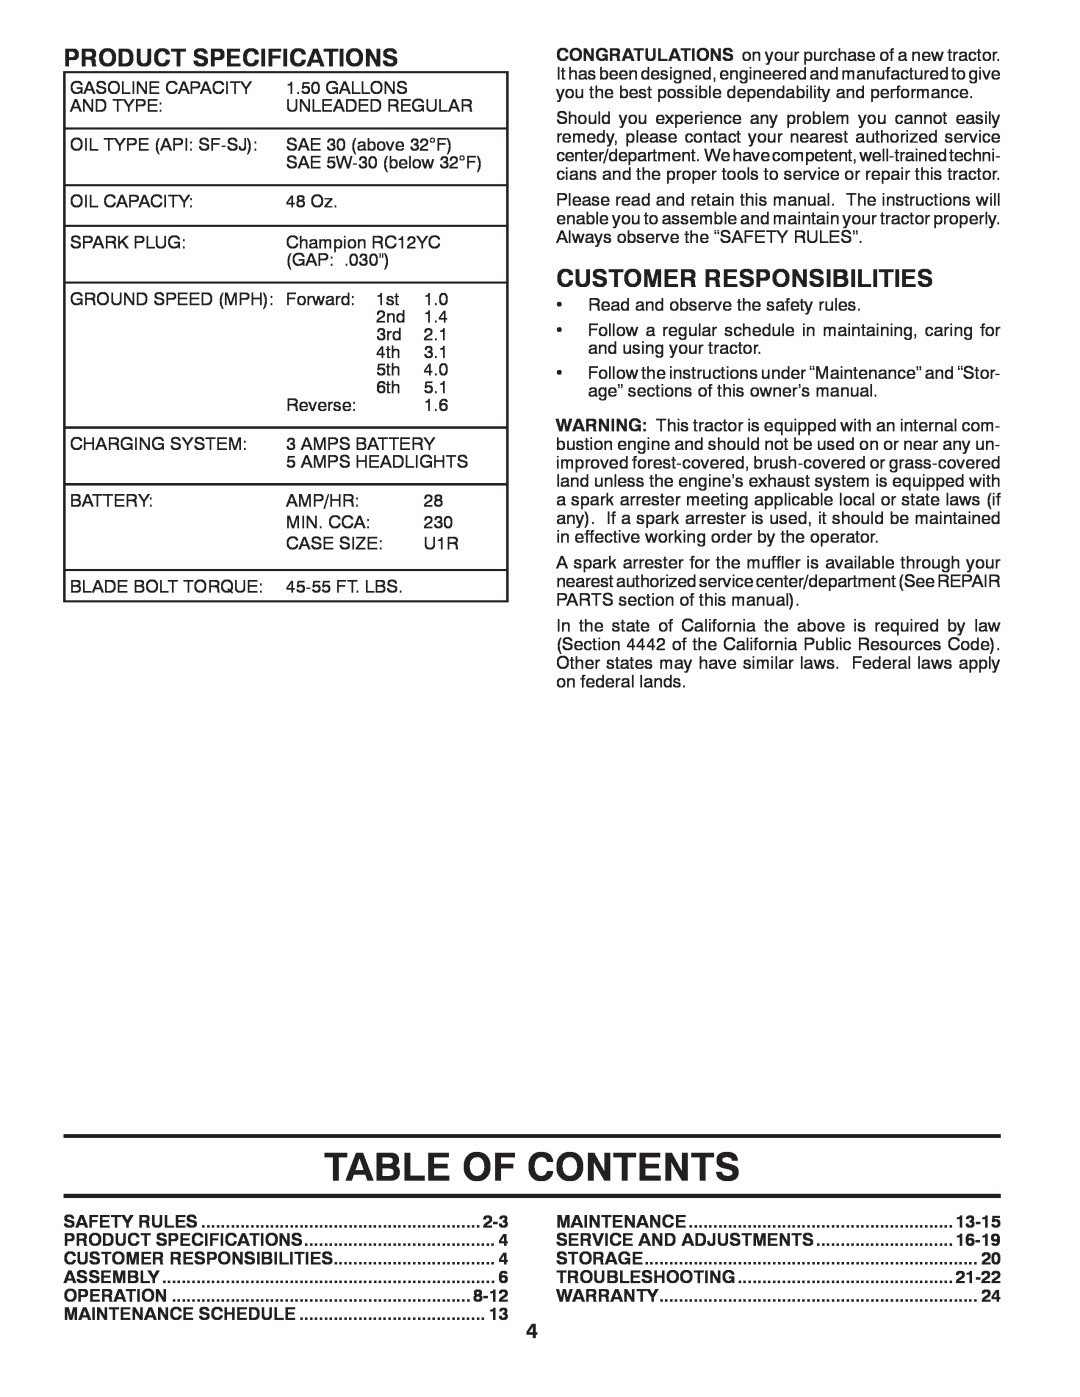 Poulan 424008 manual Table Of Contents, Product Specifications, Customer Responsibilities 